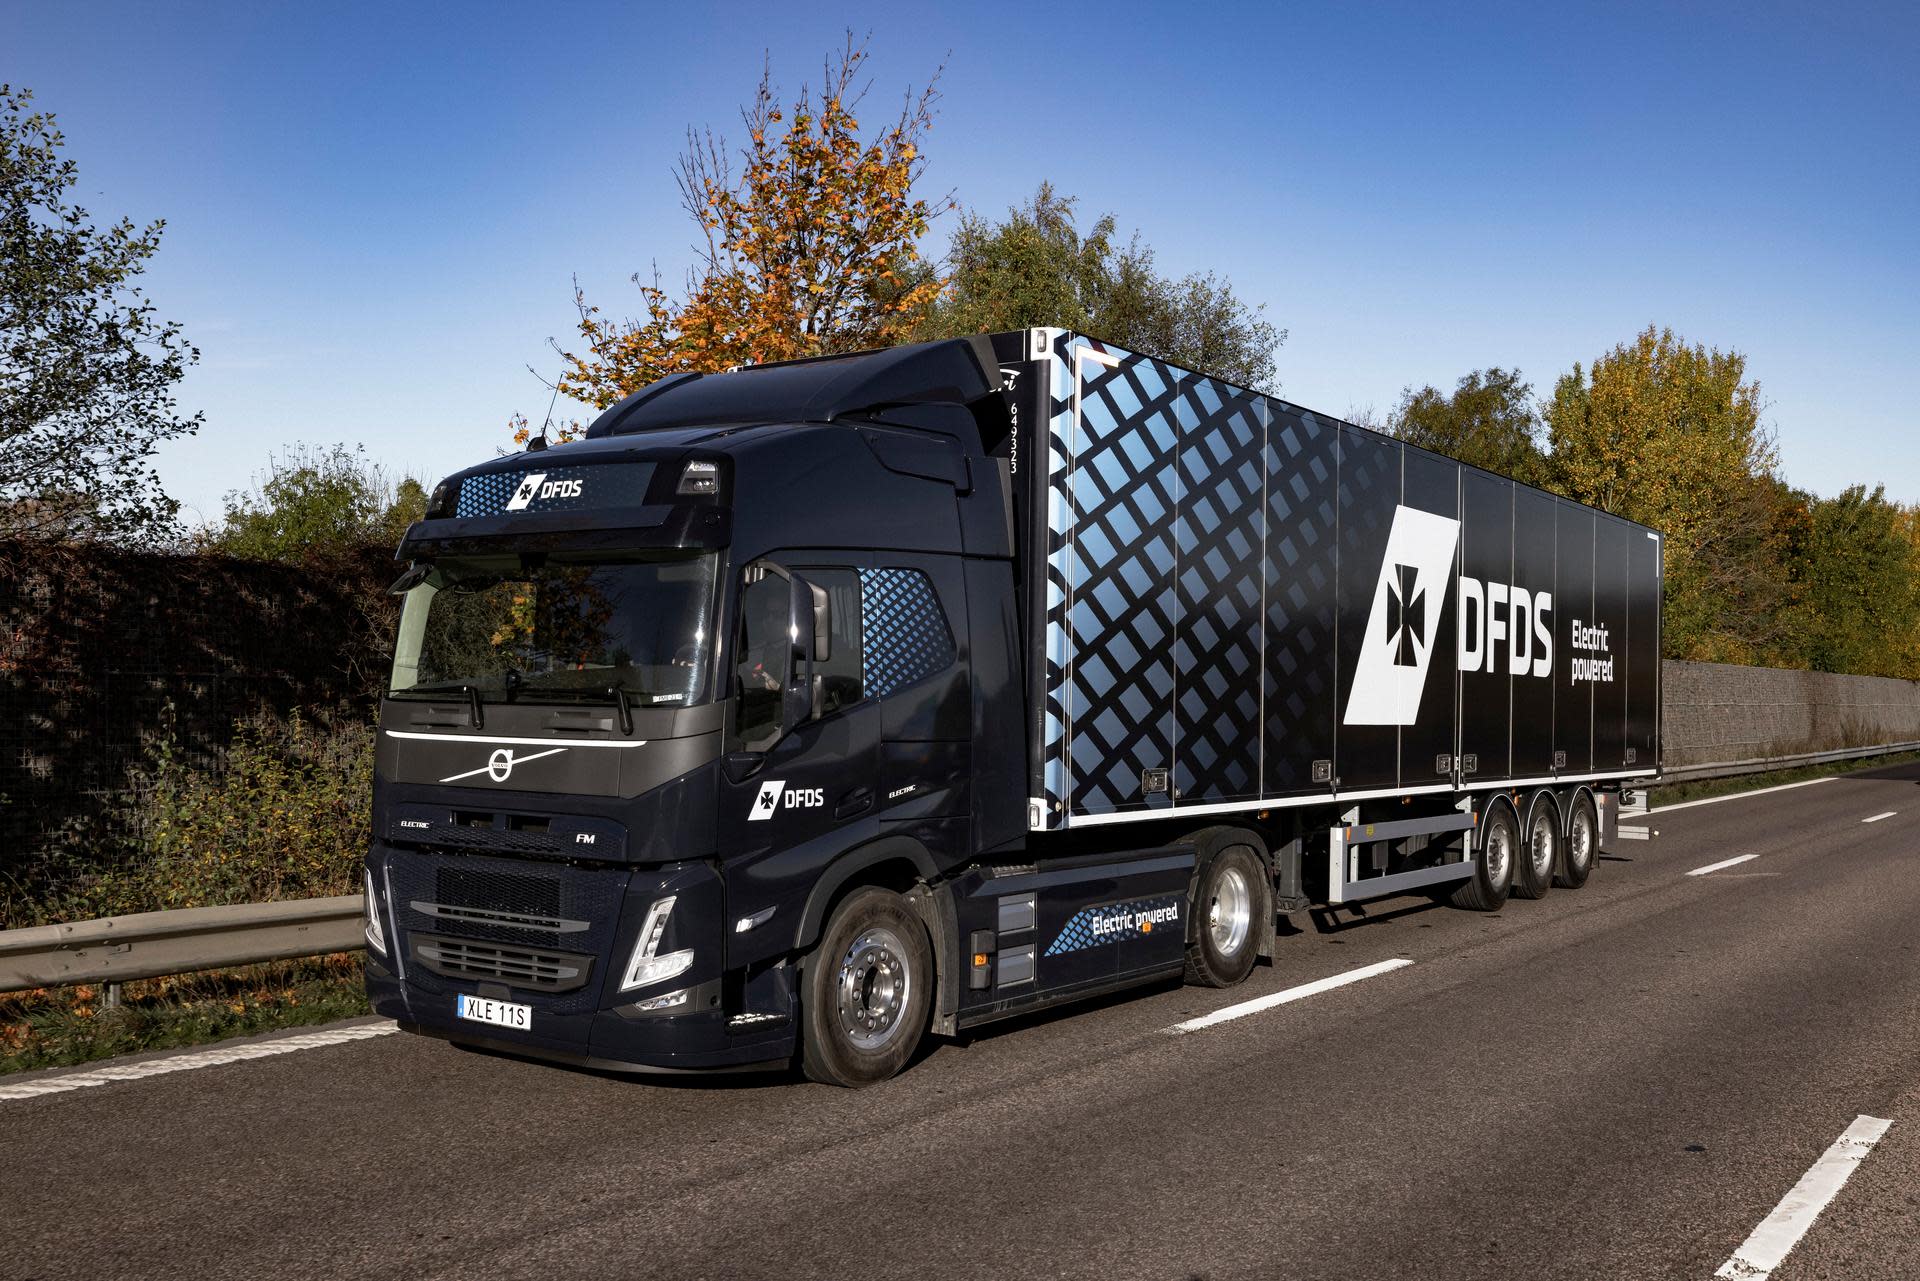 250A8337 - electric truck in dark blue DFDS livery - downloadable asset Media page About section